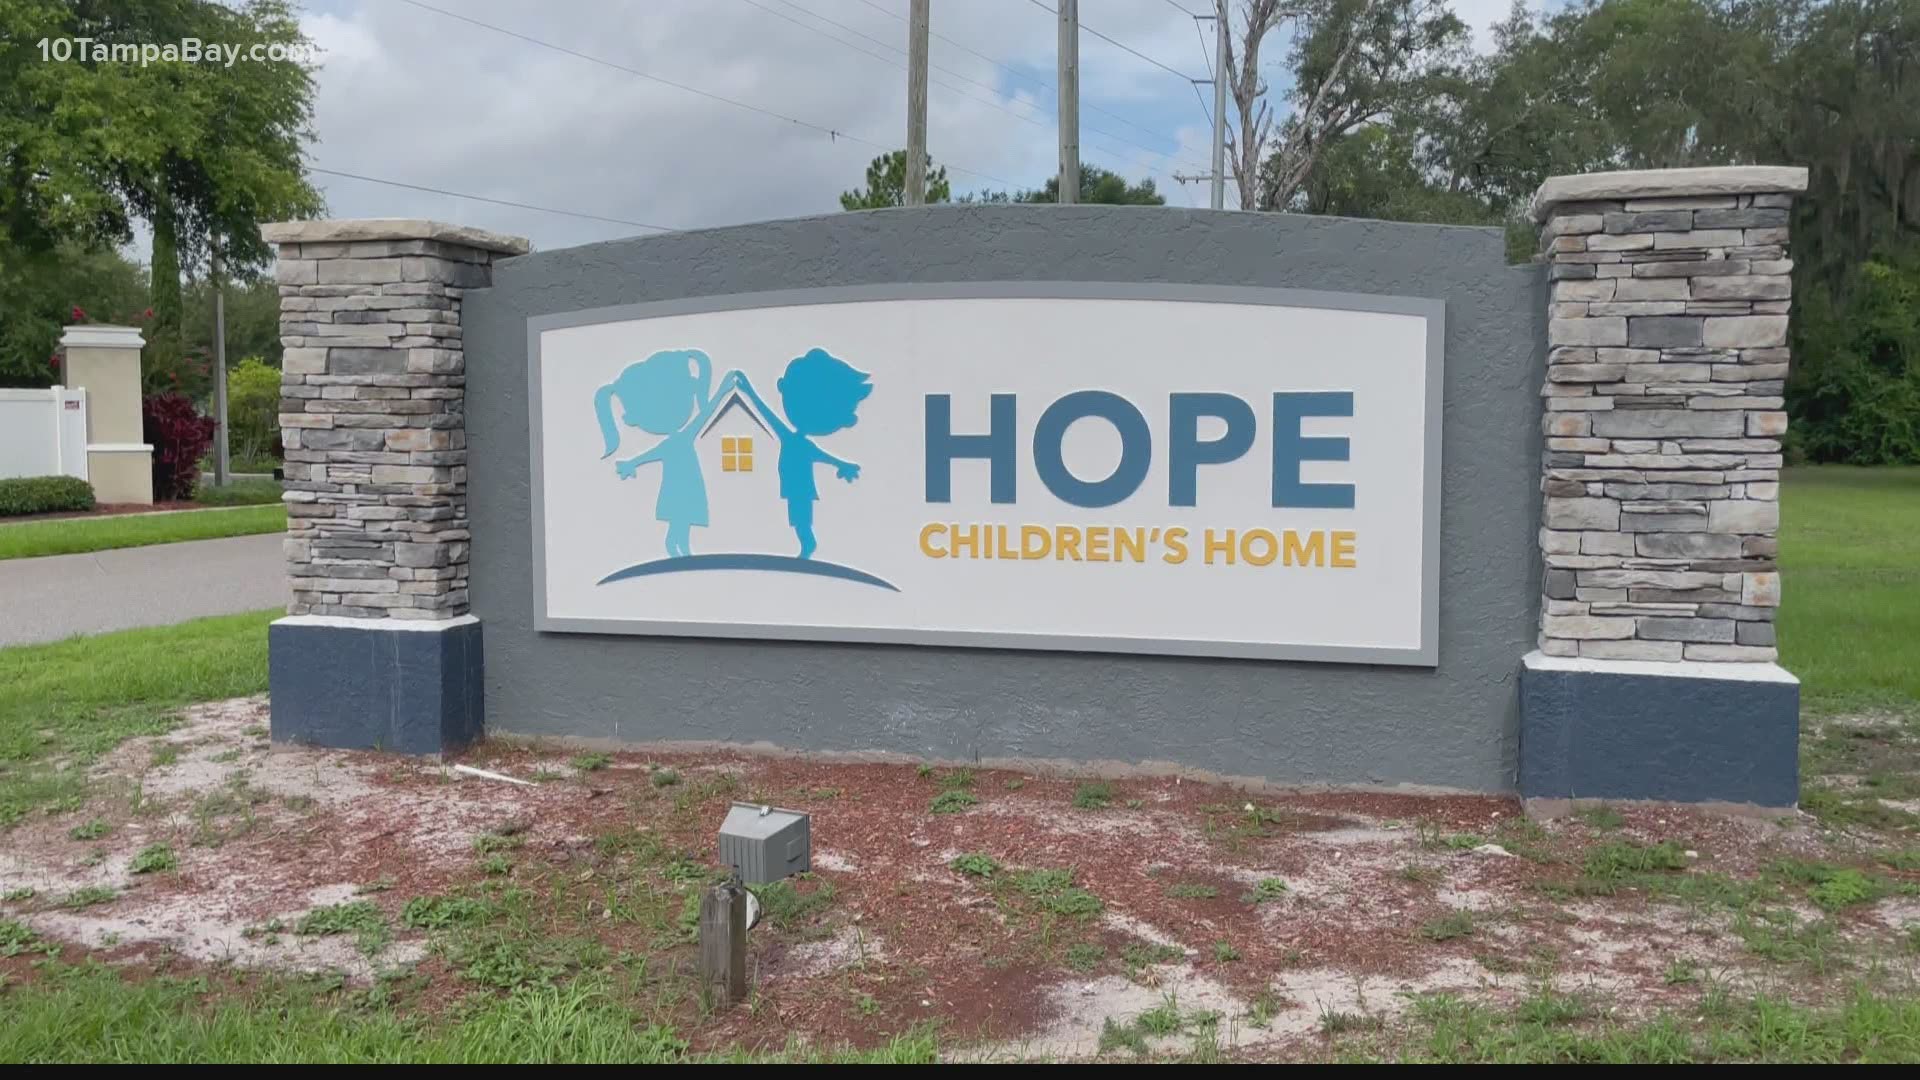 Several Tampa cleaning companies donated their time and services to clean a local children's home.